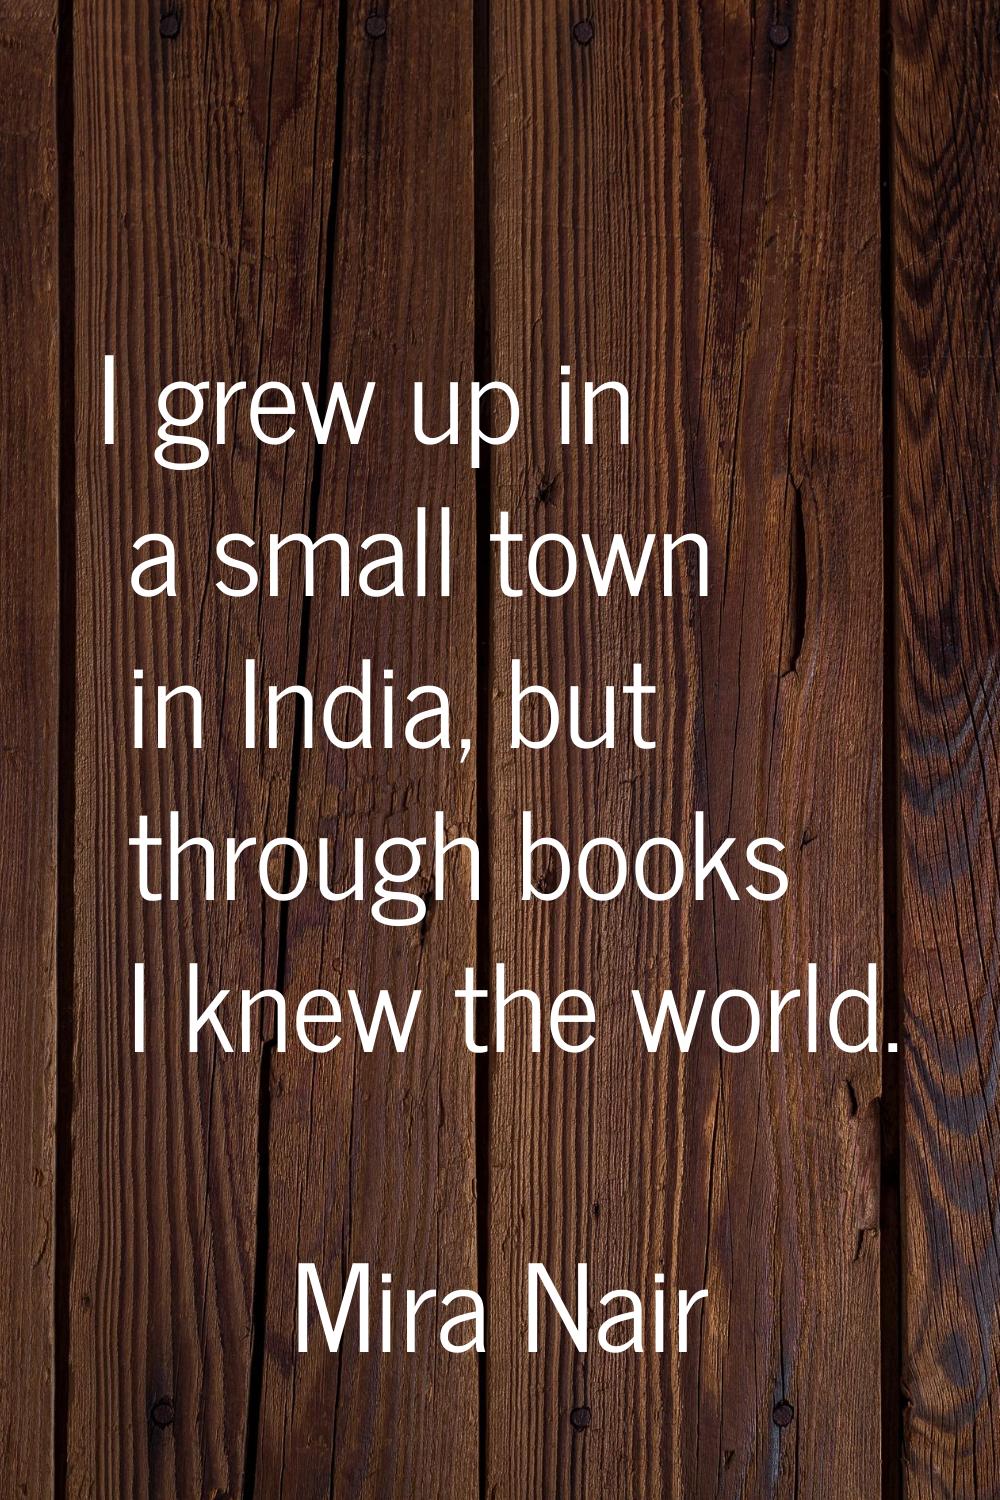 I grew up in a small town in India, but through books I knew the world.